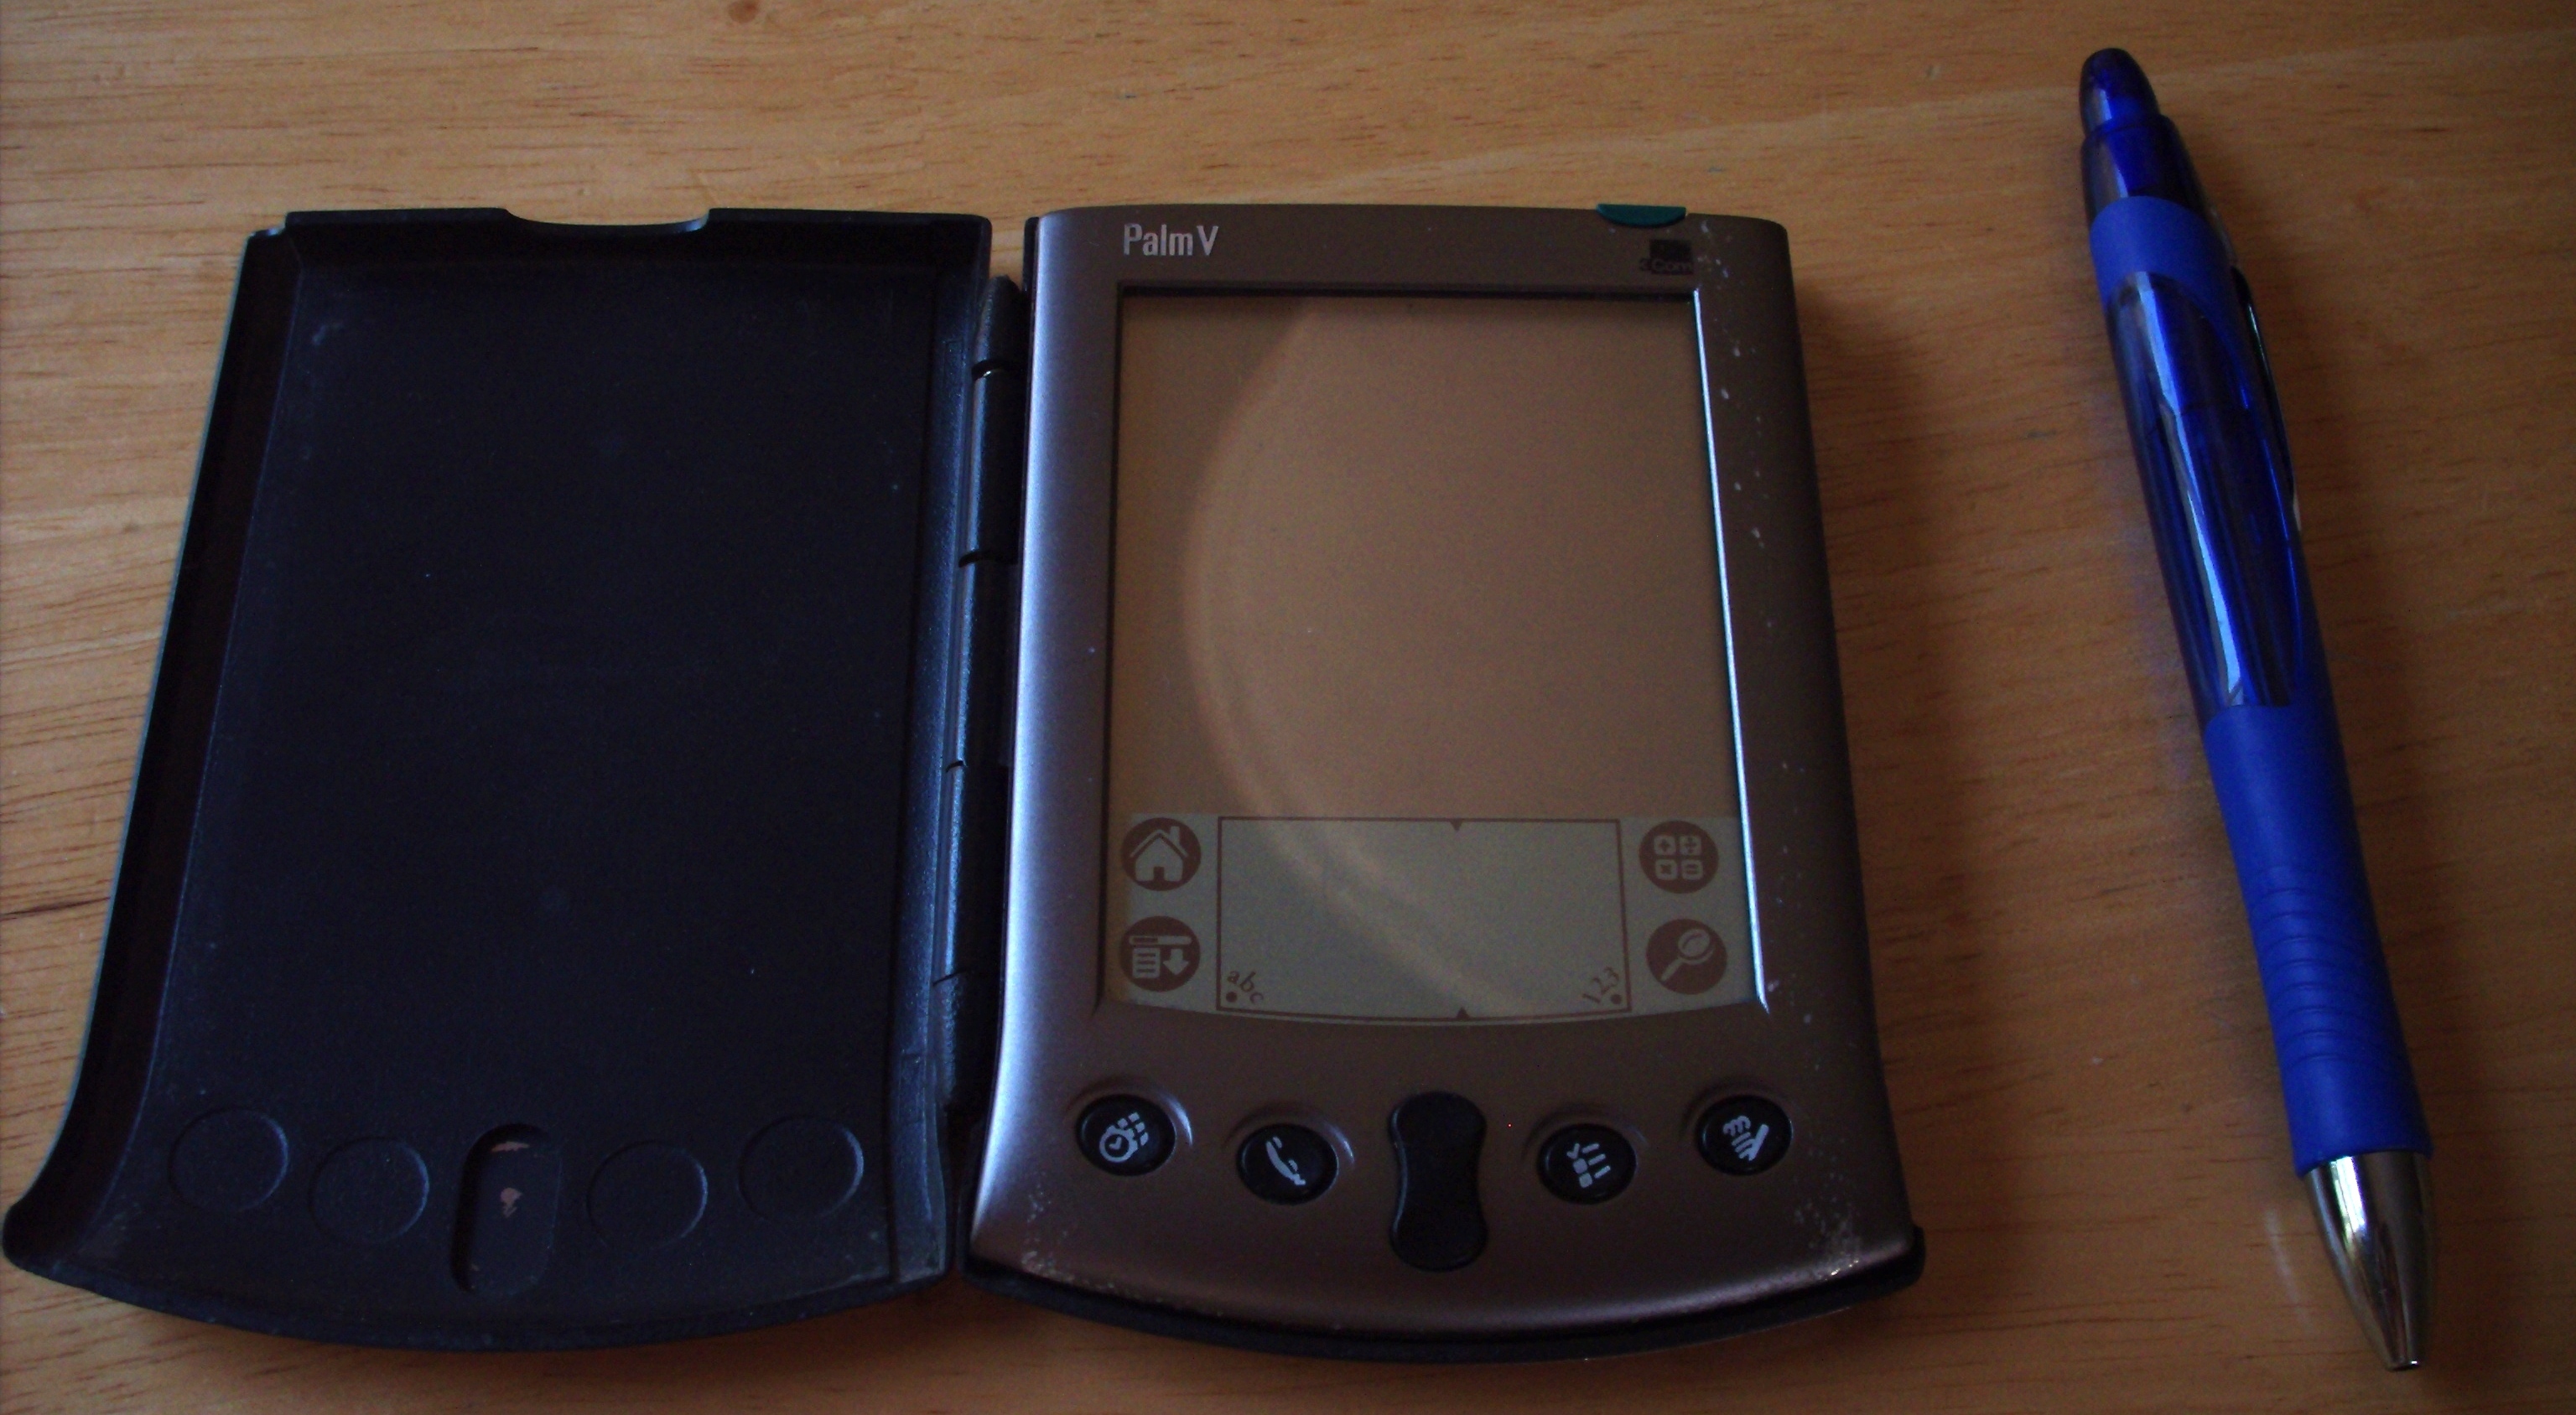 A Palm V PDA — Image from Wikipedia